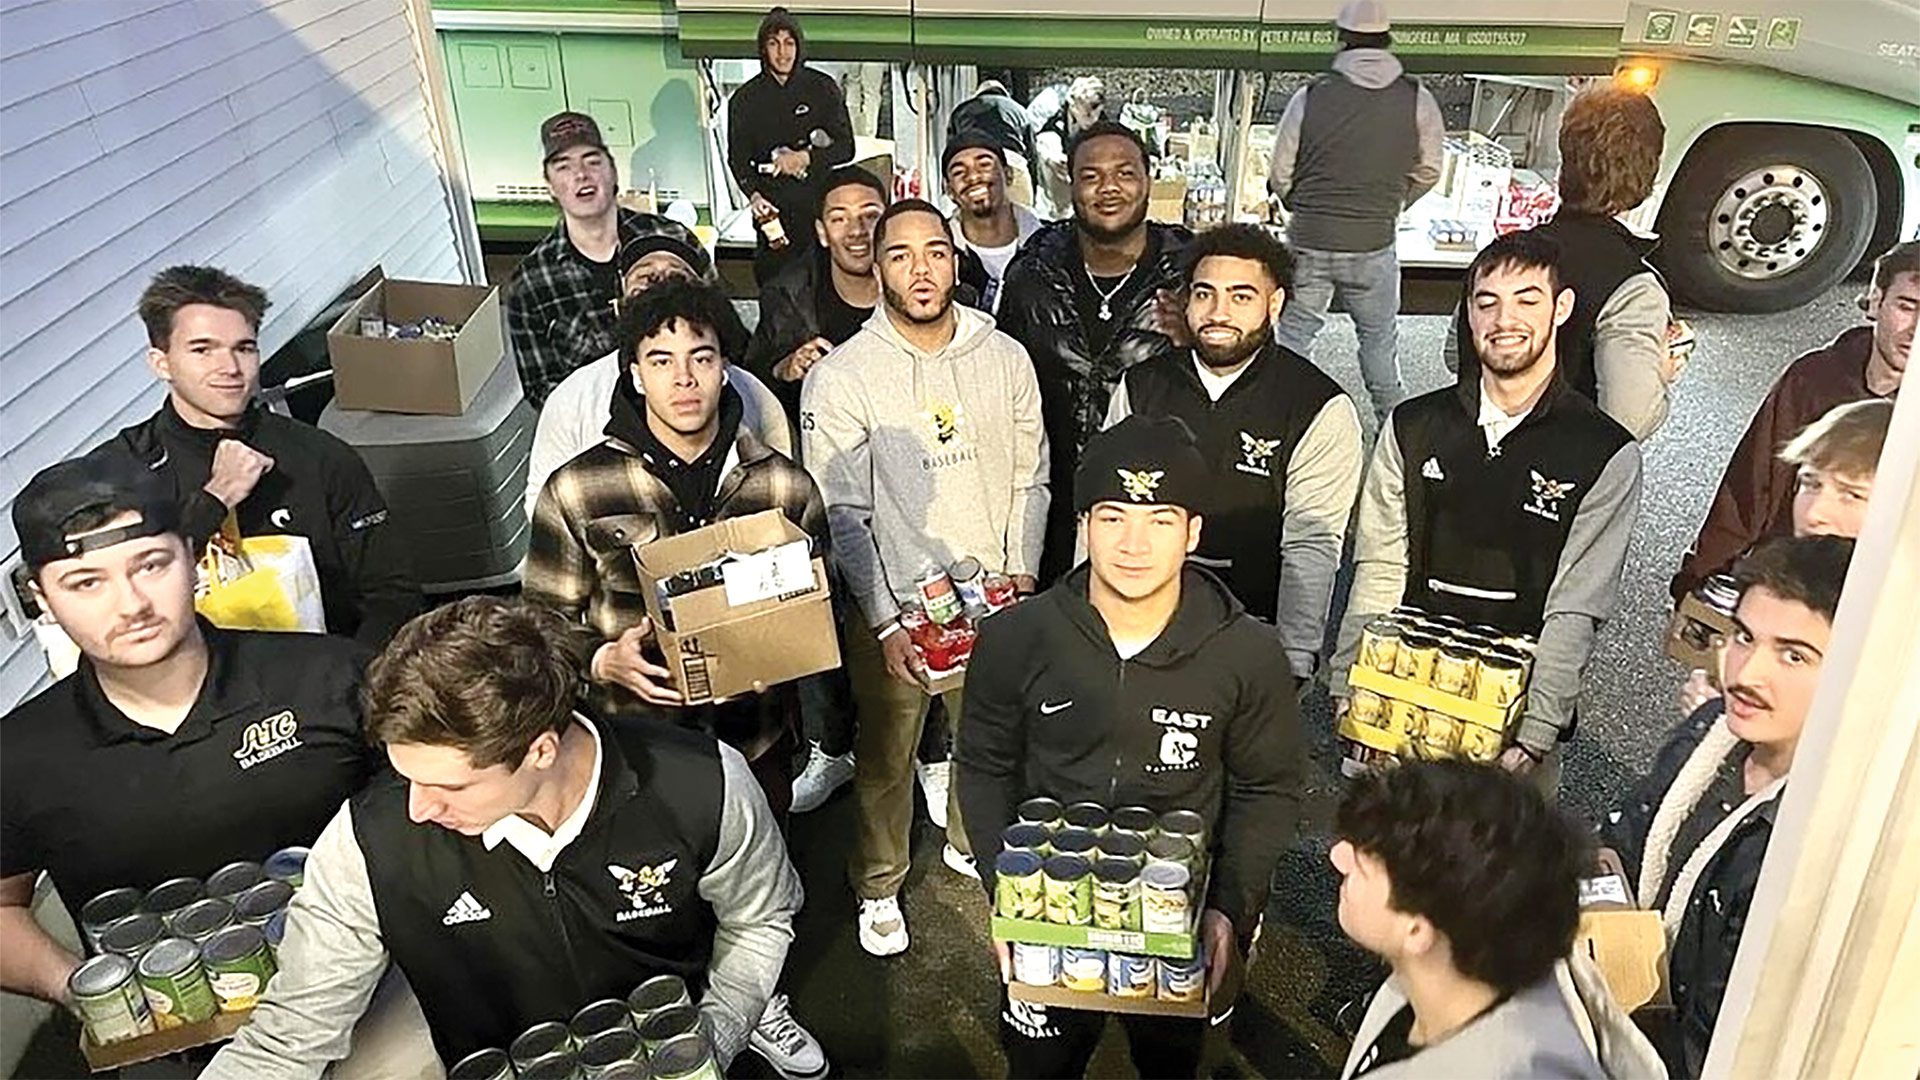 On Dec. 11, the American International College baseball team delivered 4,000 pounds of food and $500 worth of diapers